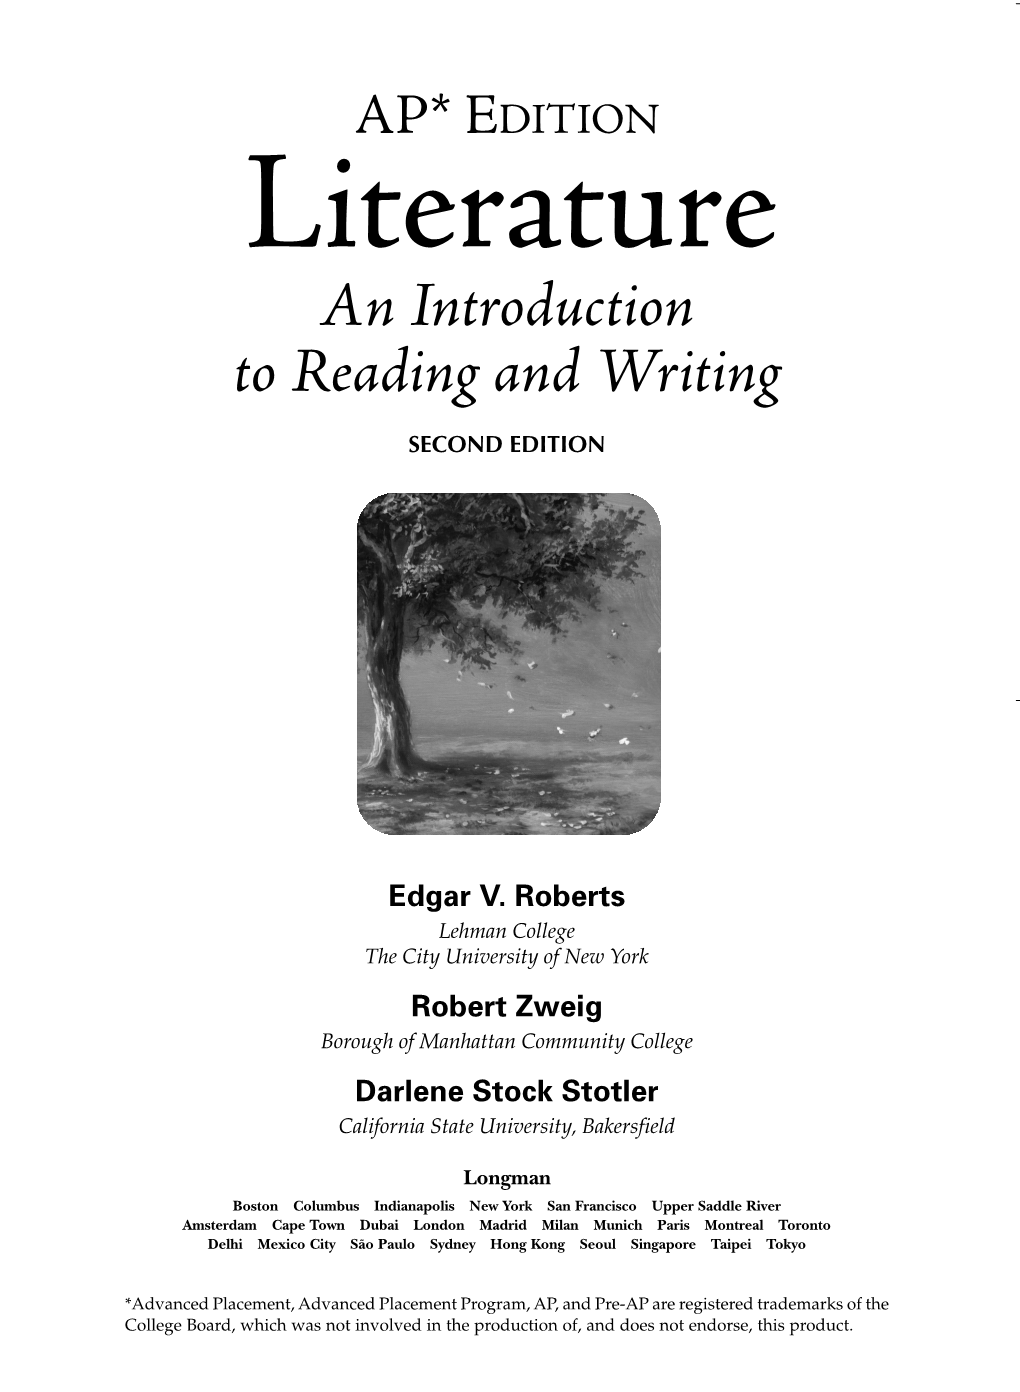 Literature an Introduction to Reading and Writing